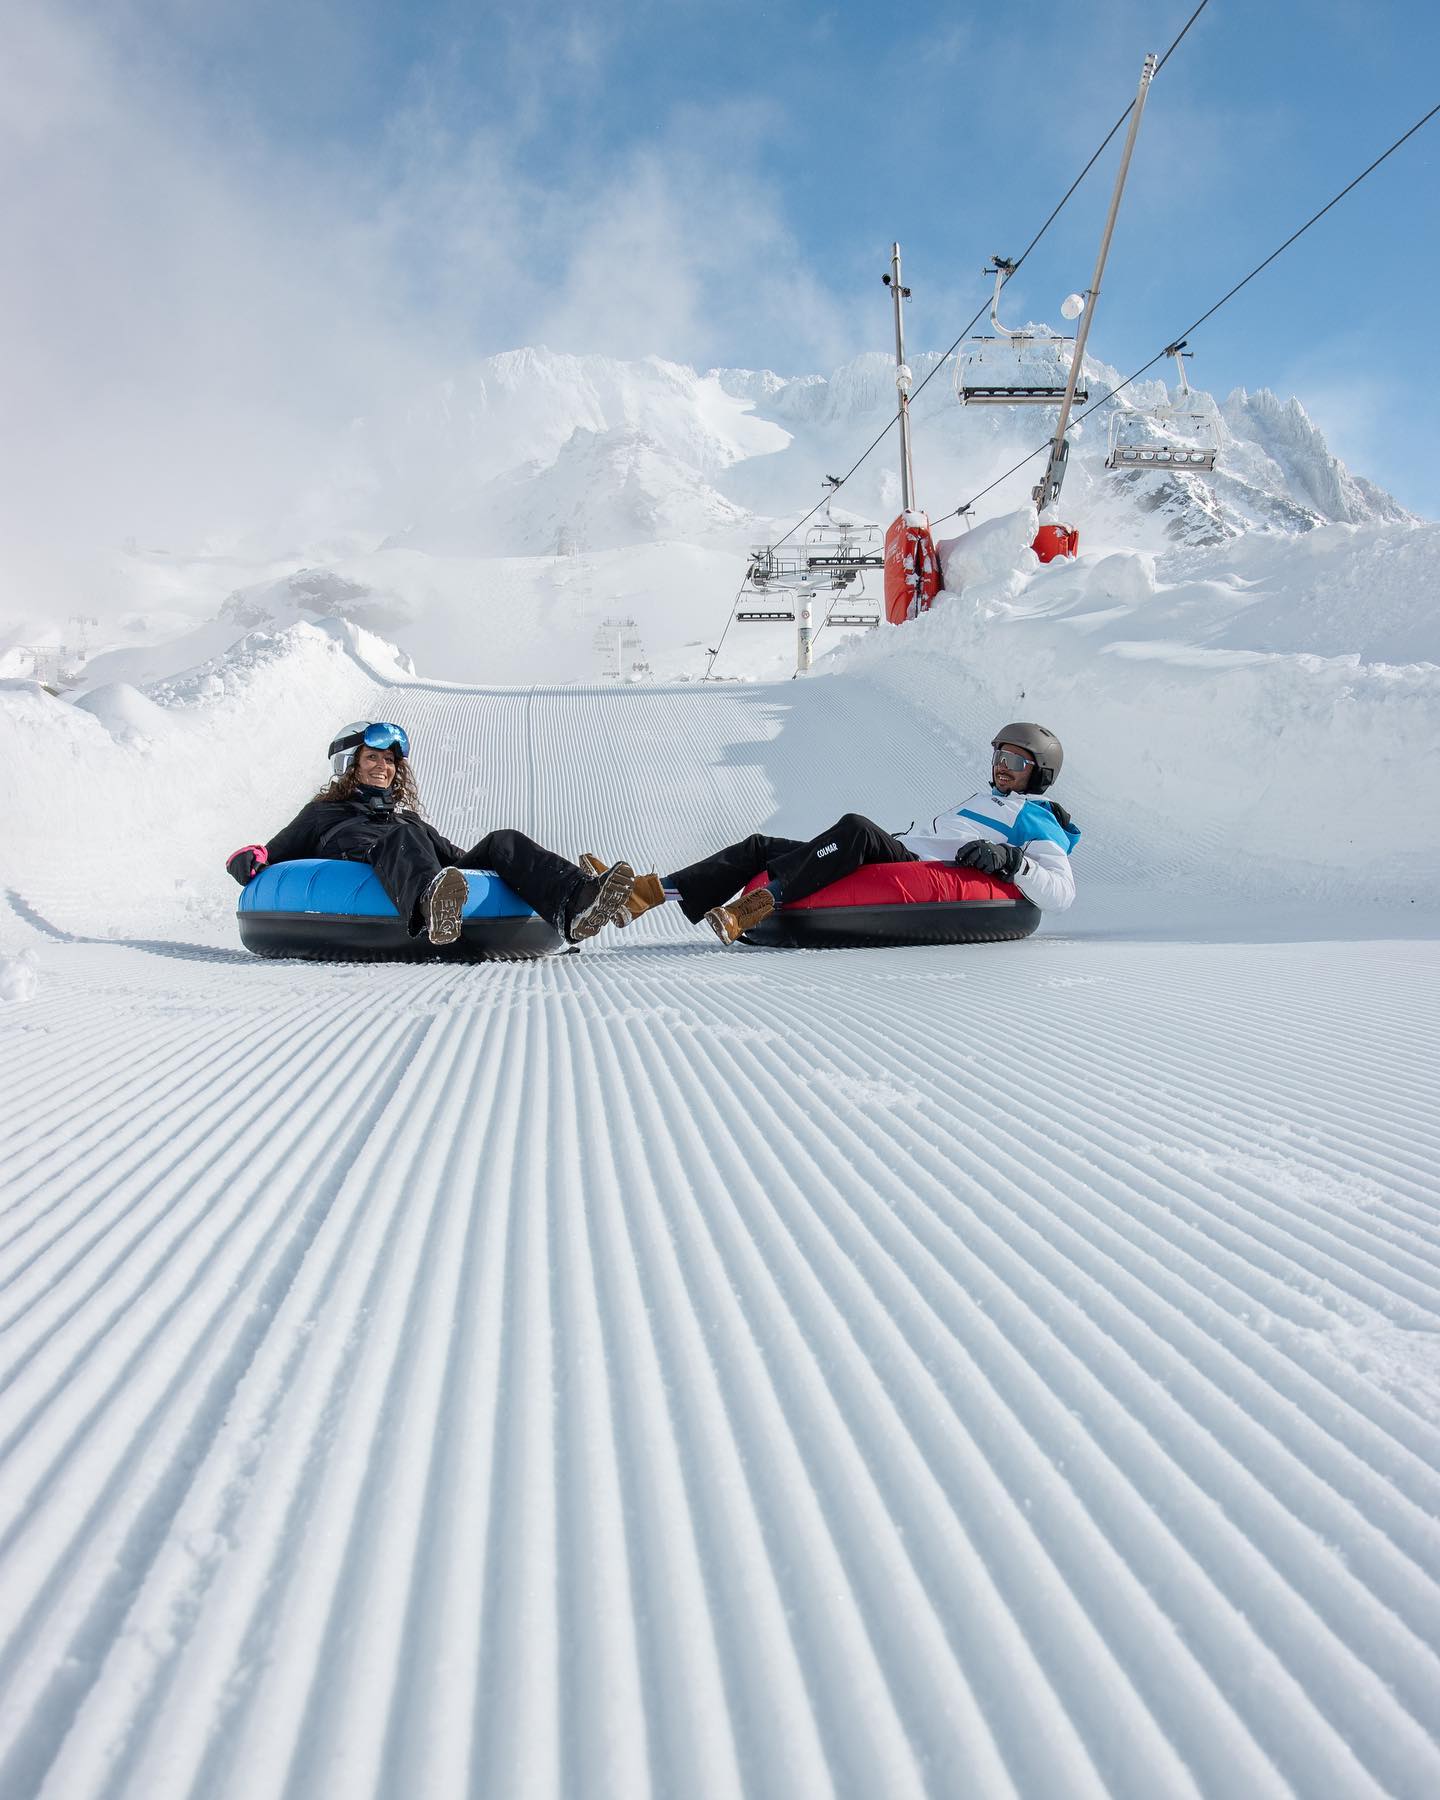 NEW - Snowtubing has arrived in Val Thorens 🛷🤩